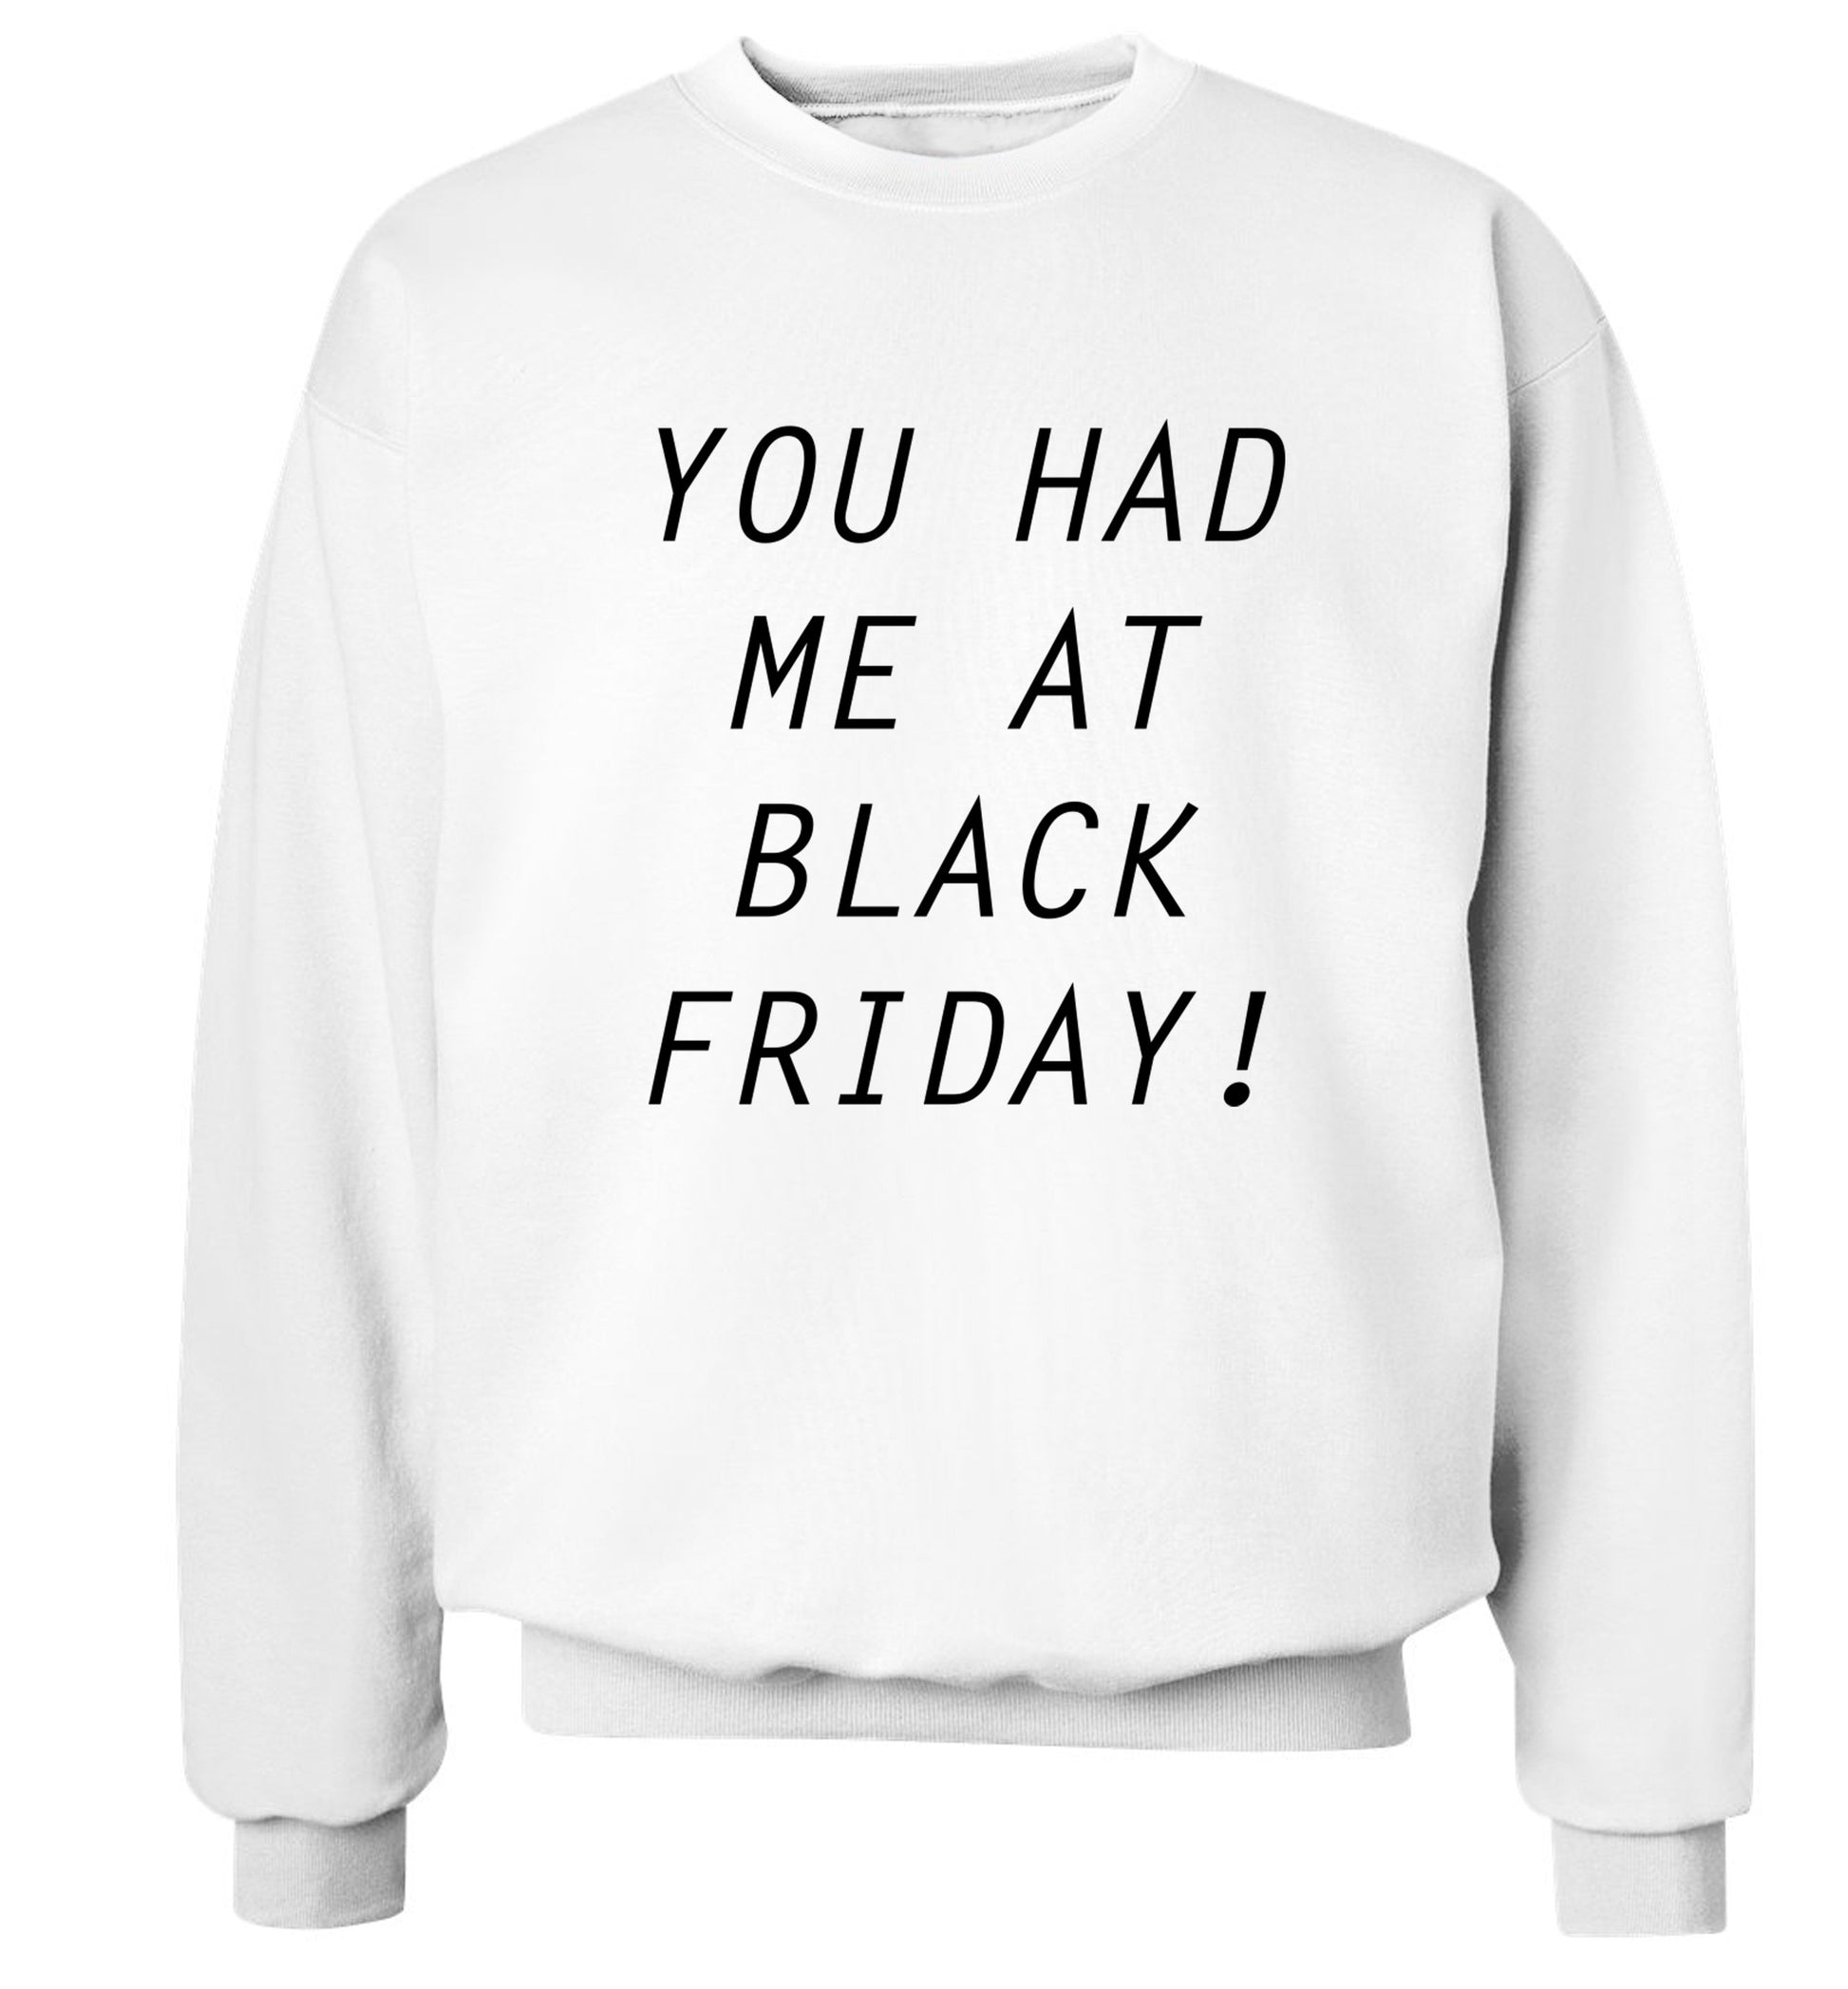 You had me at black friday Adult's unisex white Sweater 2XL